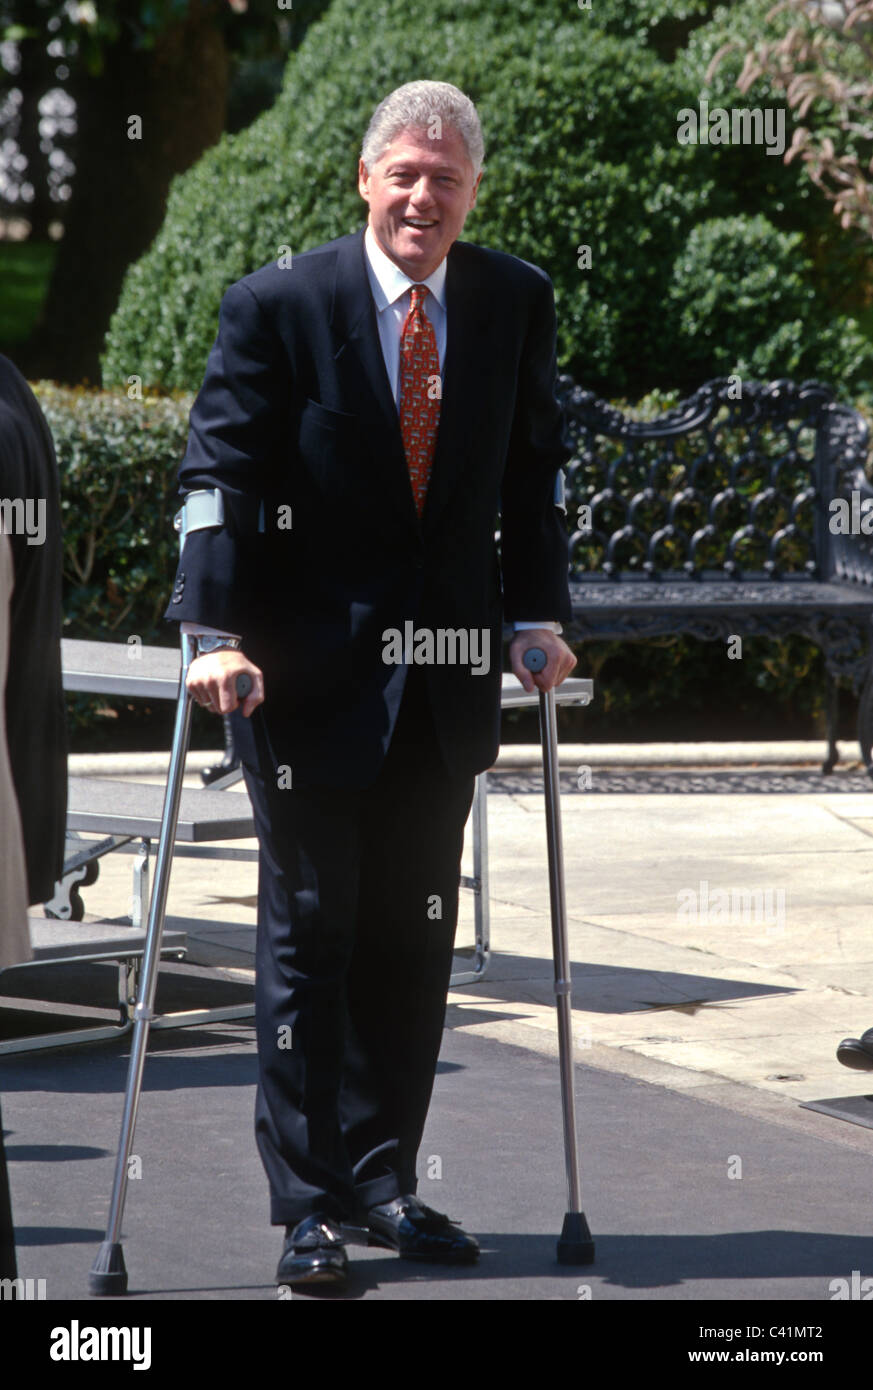 president-bill-clinton-on-crutches-at-the-white-house-in-washington-C41MT2.jpg